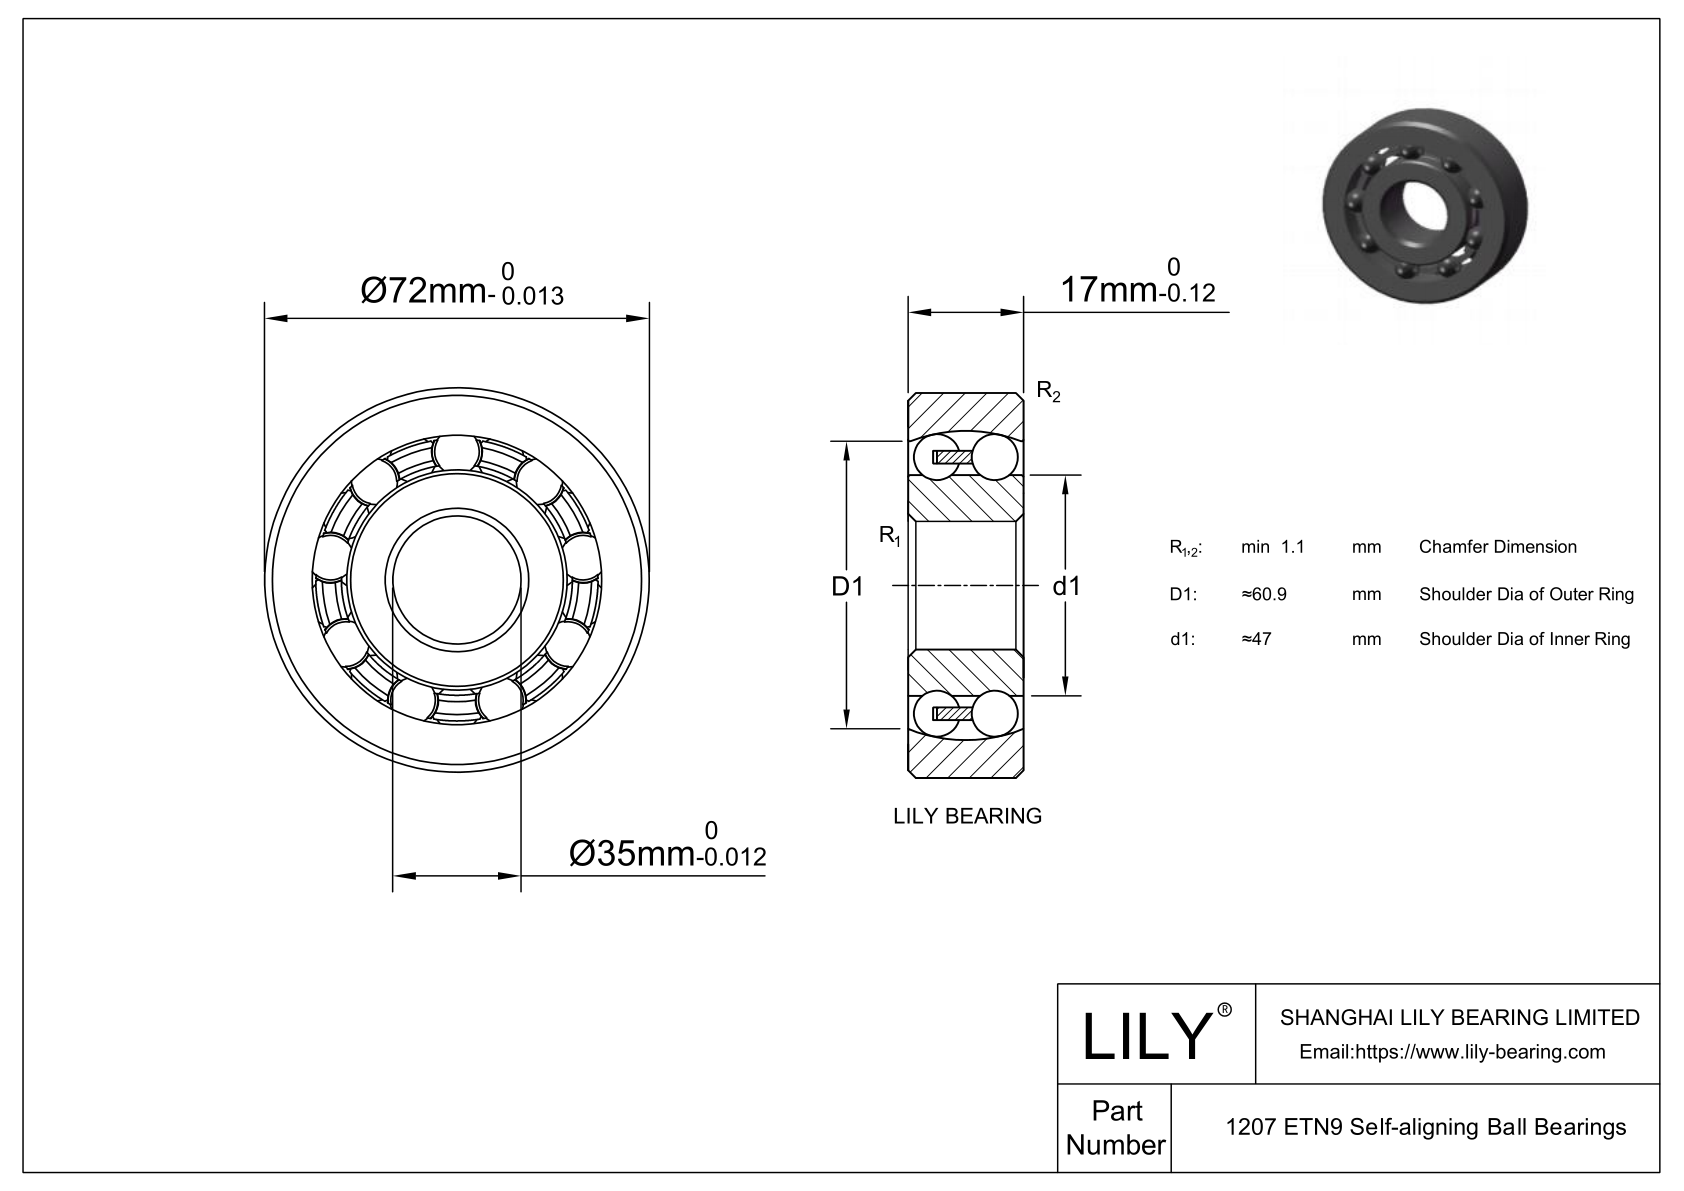 S1207 ETN9 Stainless Steel Self Aligning Ball Bearings cad drawing